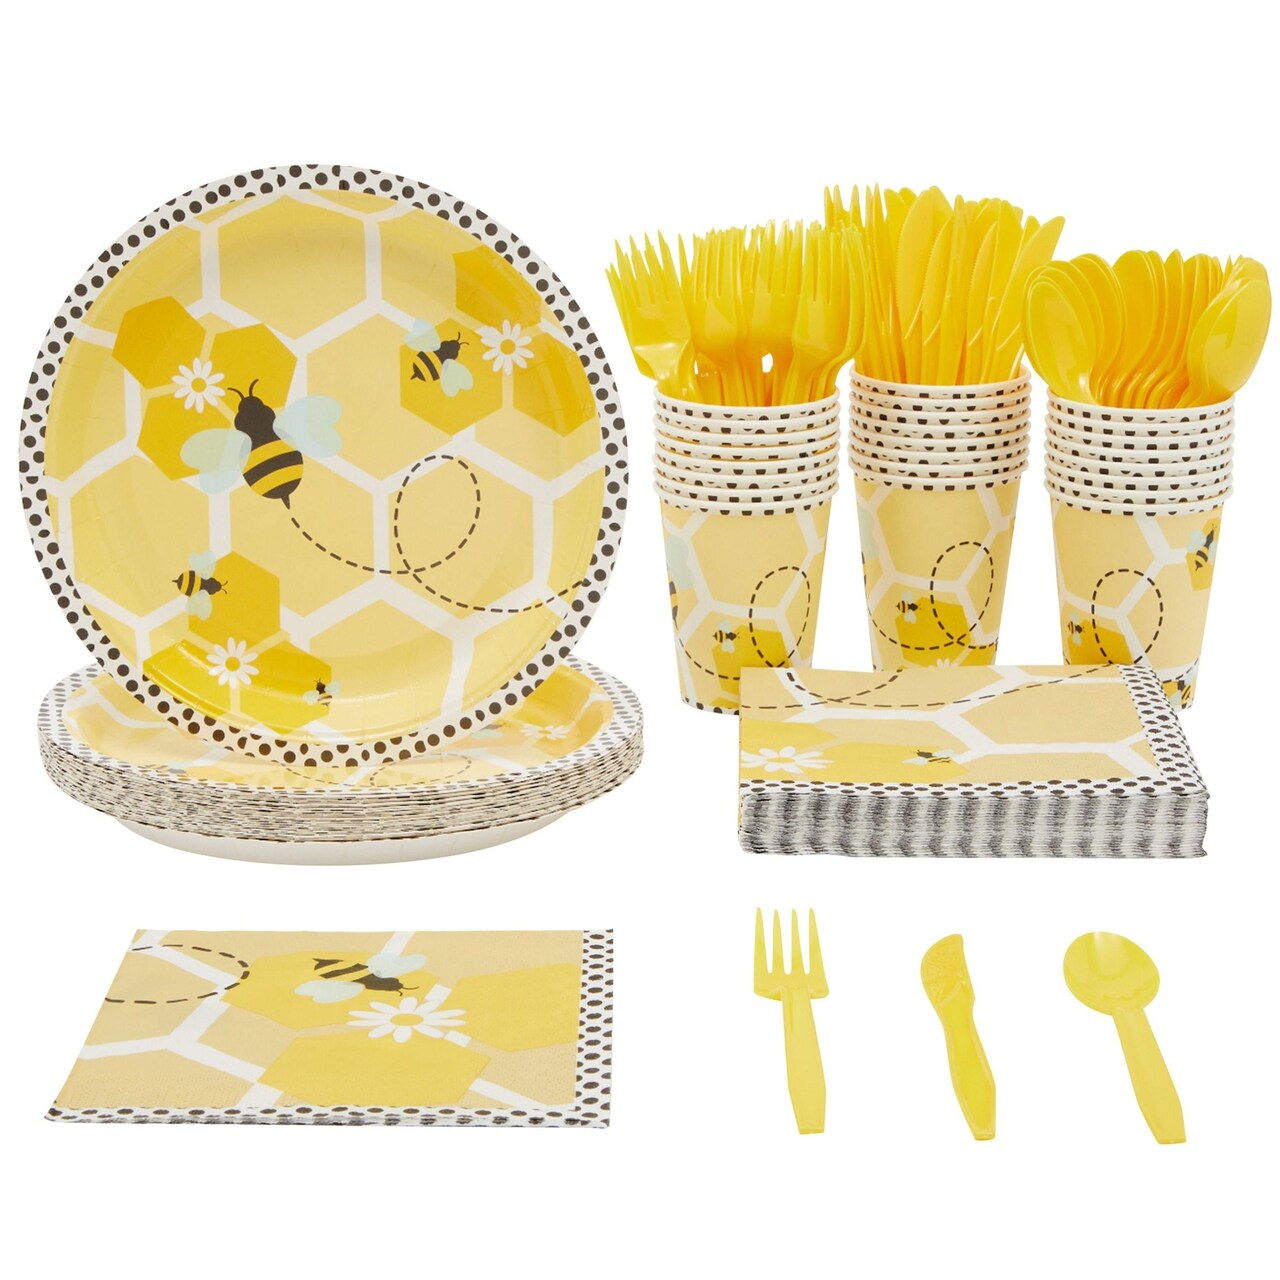 144 Piece Bumble Bee Party Supplies - Serves 24 Party Plates, Napkins,  Cups, and Cutlery for What Will It Bee Gender Reveal Decorations